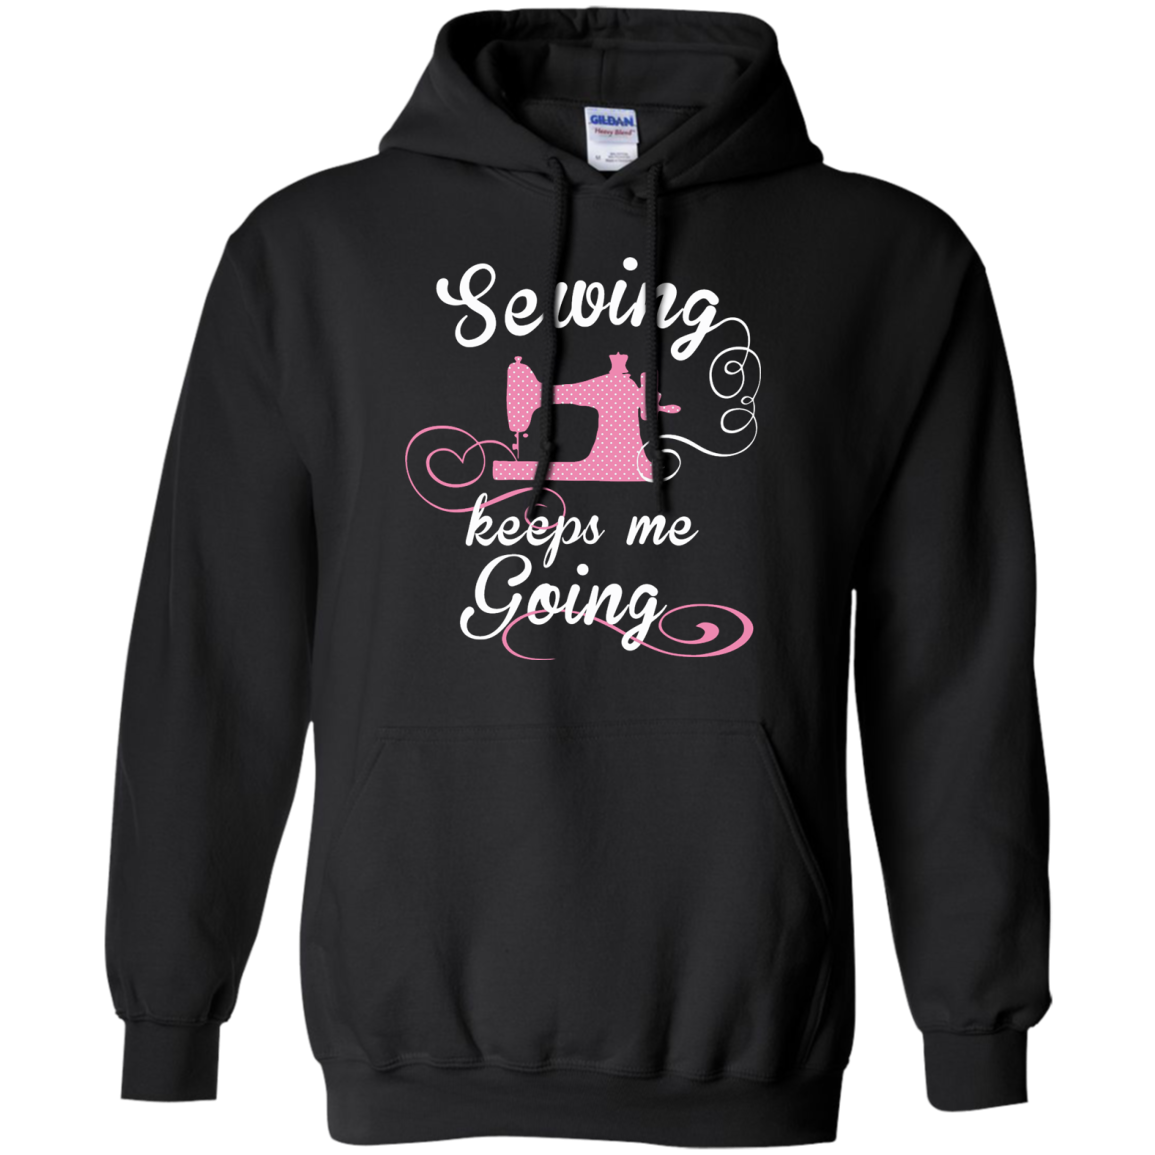 Sewing Keeps Me Going Pullover Hoodies - Crafter4Life - 2